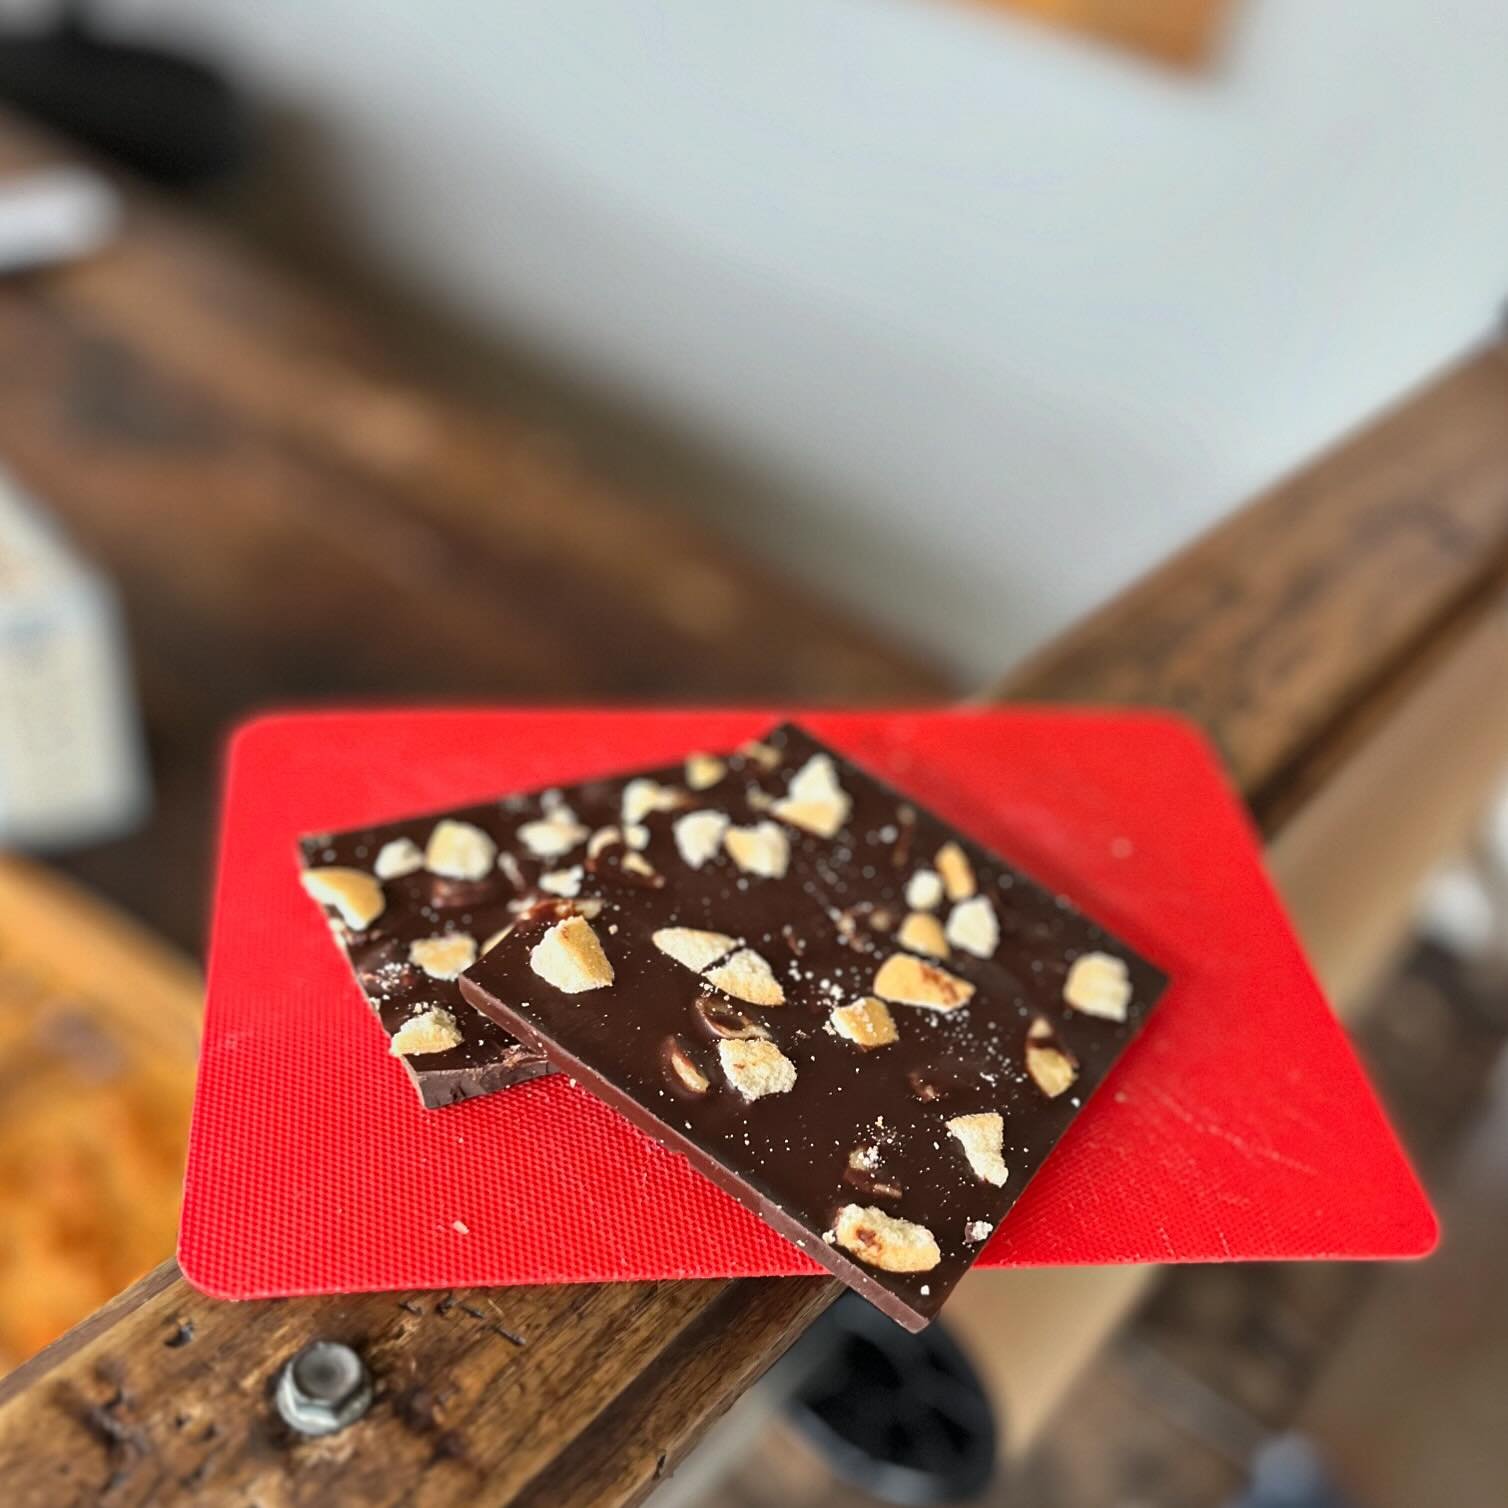 👀 👀 RND is underway for our next Limited Edition bar, and let me tell you&hellip;It&rsquo;s GOOD! Any guesses on what she may be?! **And NO, those aren&rsquo;t nuts on there! 
&bull;
Stay tuned for this perfect addition to summertime!&bull;
&bull;
